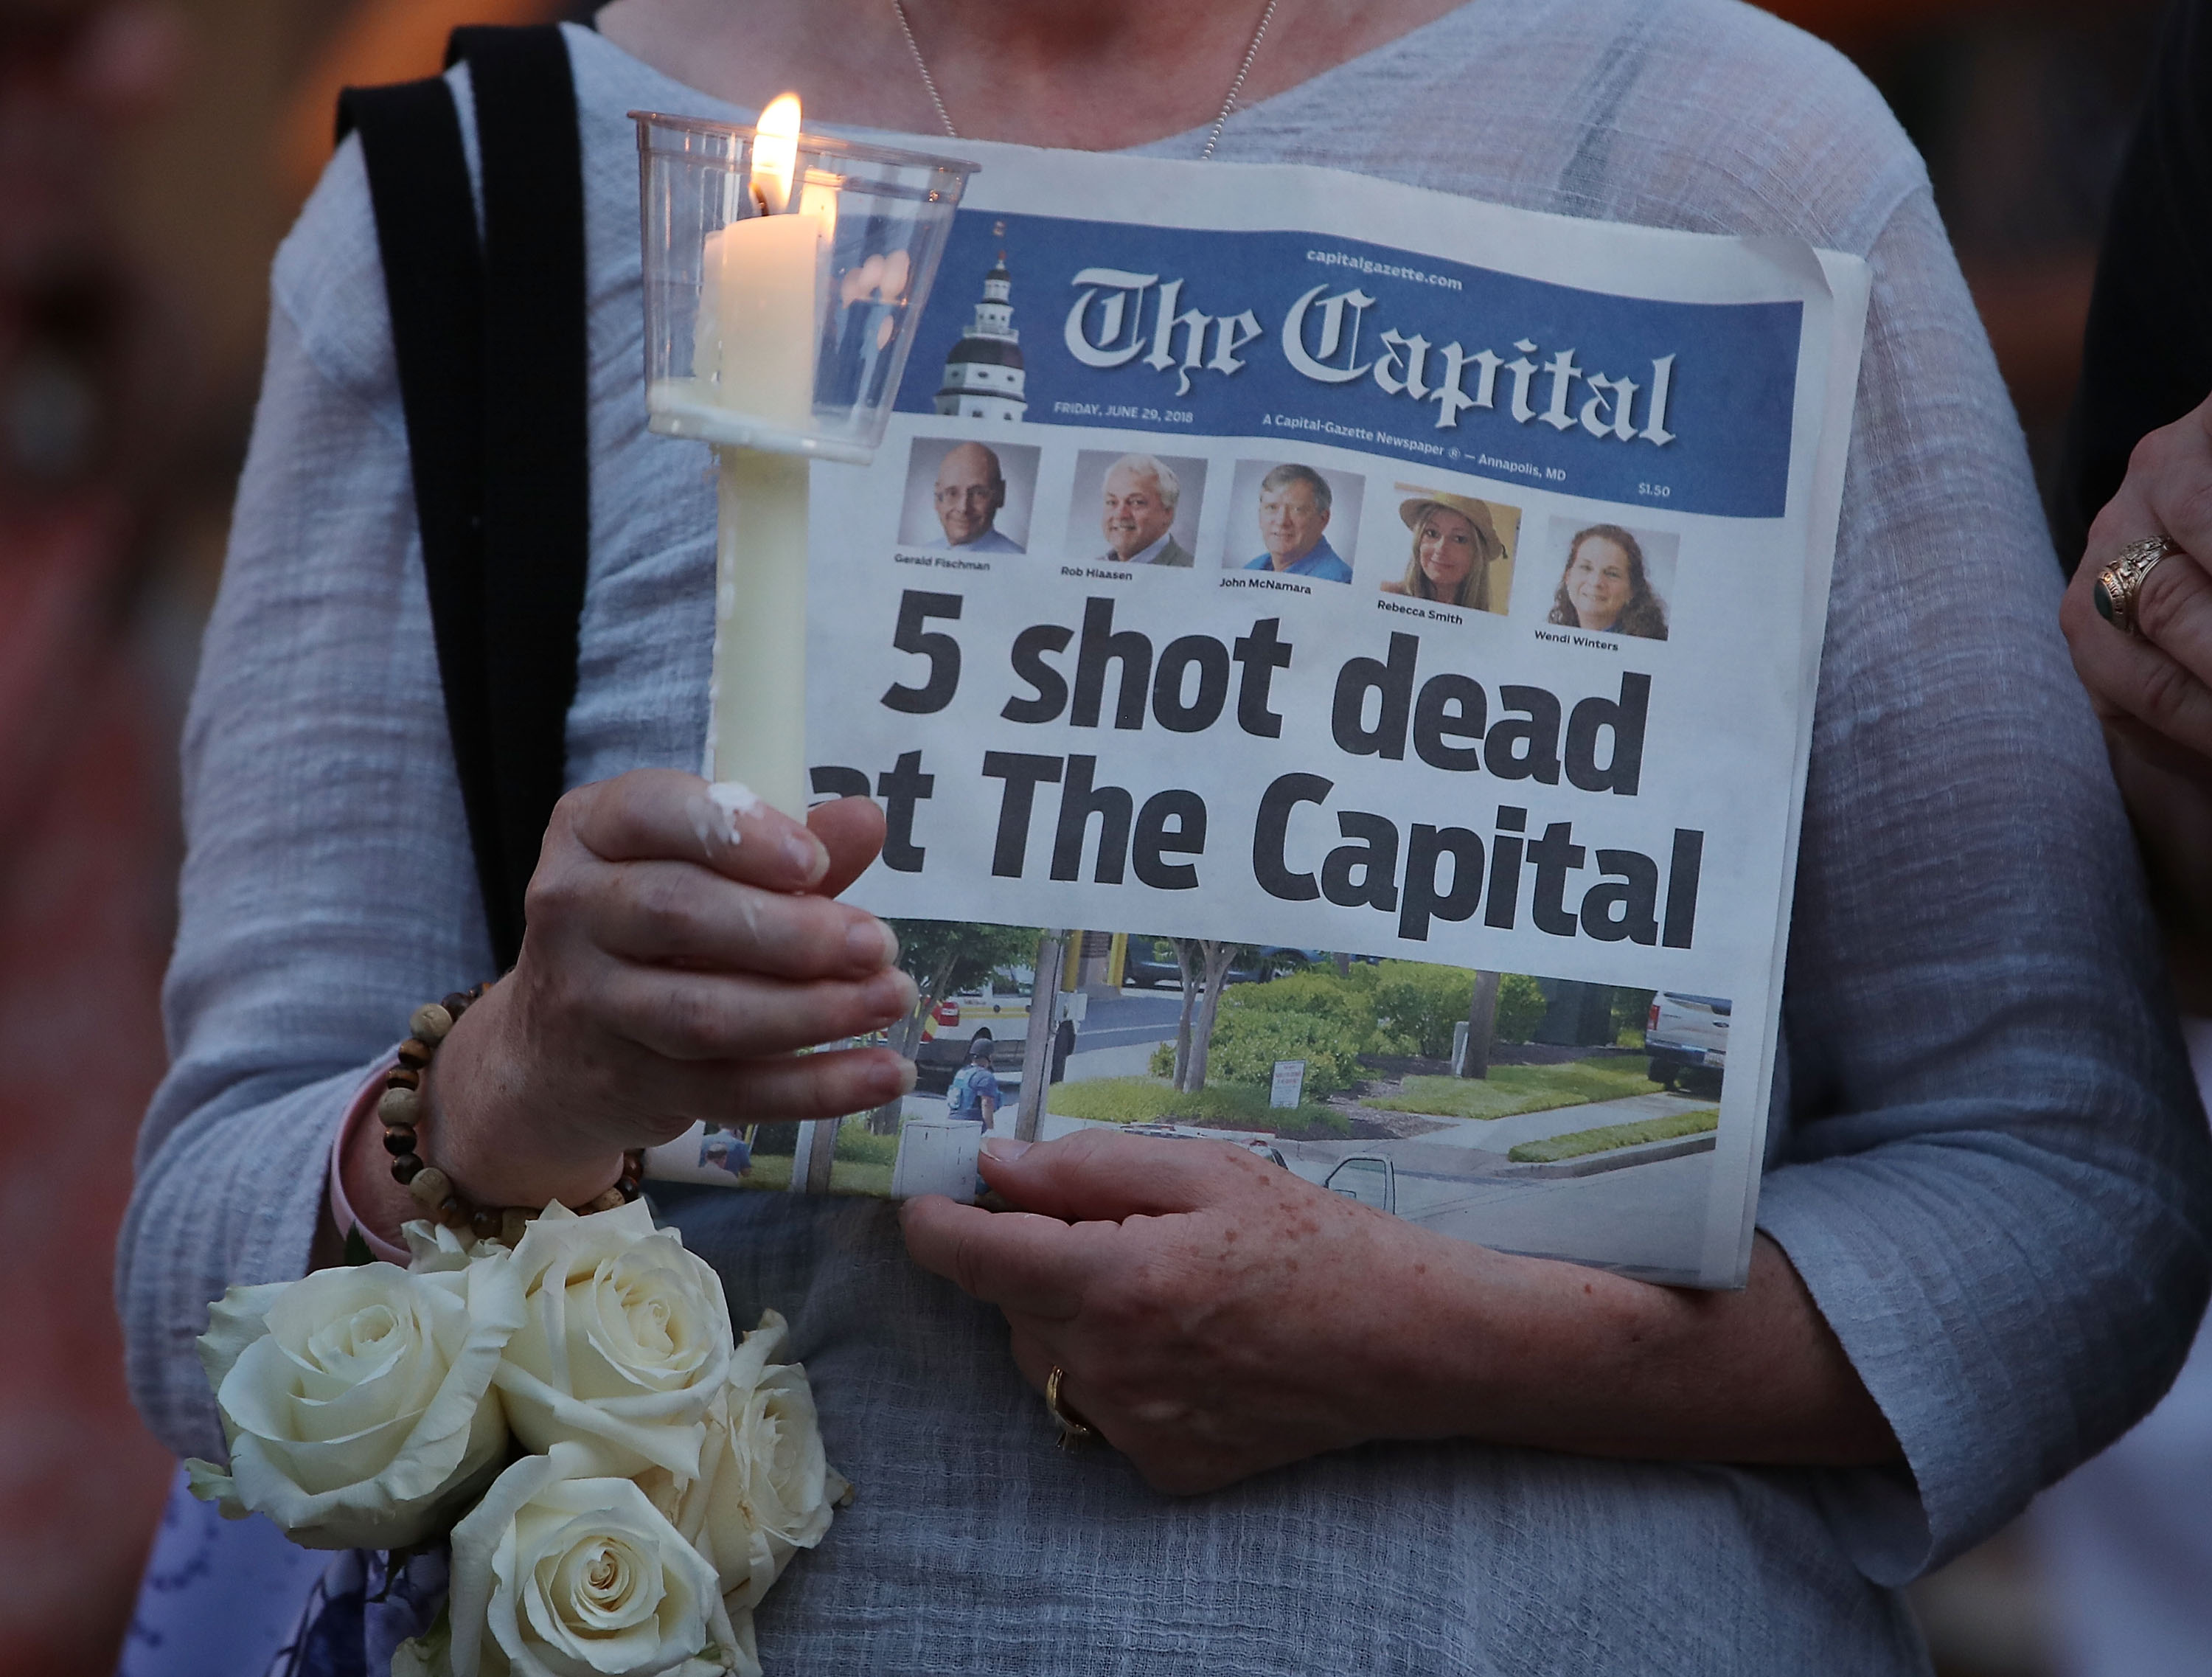 A women holds today's edition of the Capital Gazette newspaper during a candlelight vigil to honor the 5 people who were shot and killed yesterday, on June 29, 2018 in Annapolis, Maryland. (Mark Wilson—Getty Images)